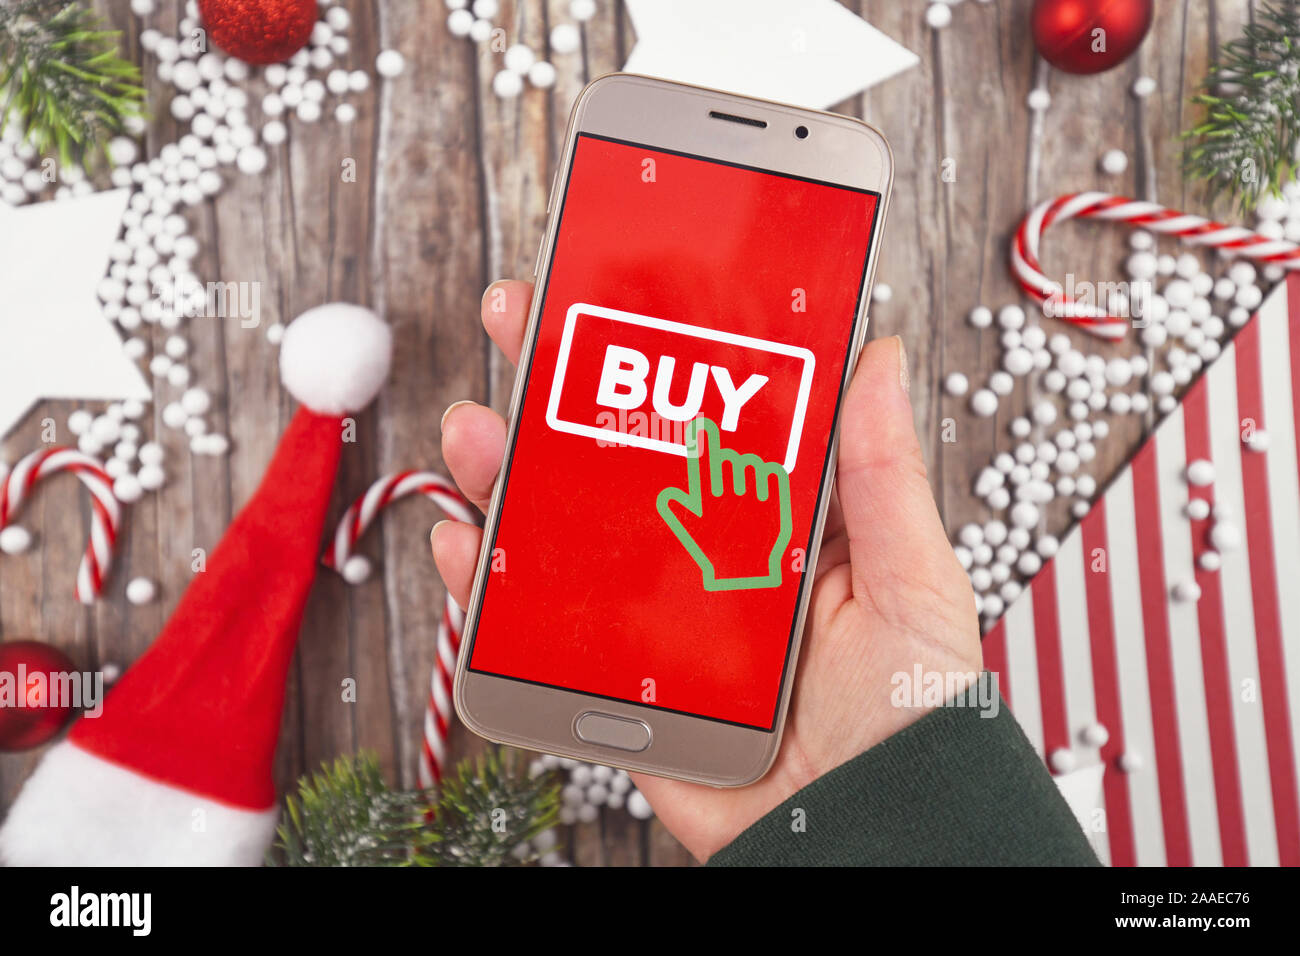 Concept for Christmas seasonal online shopping and sales with hand holding cell phone with 'Buy' sign button in red background in front of wooden desk Stock Photo